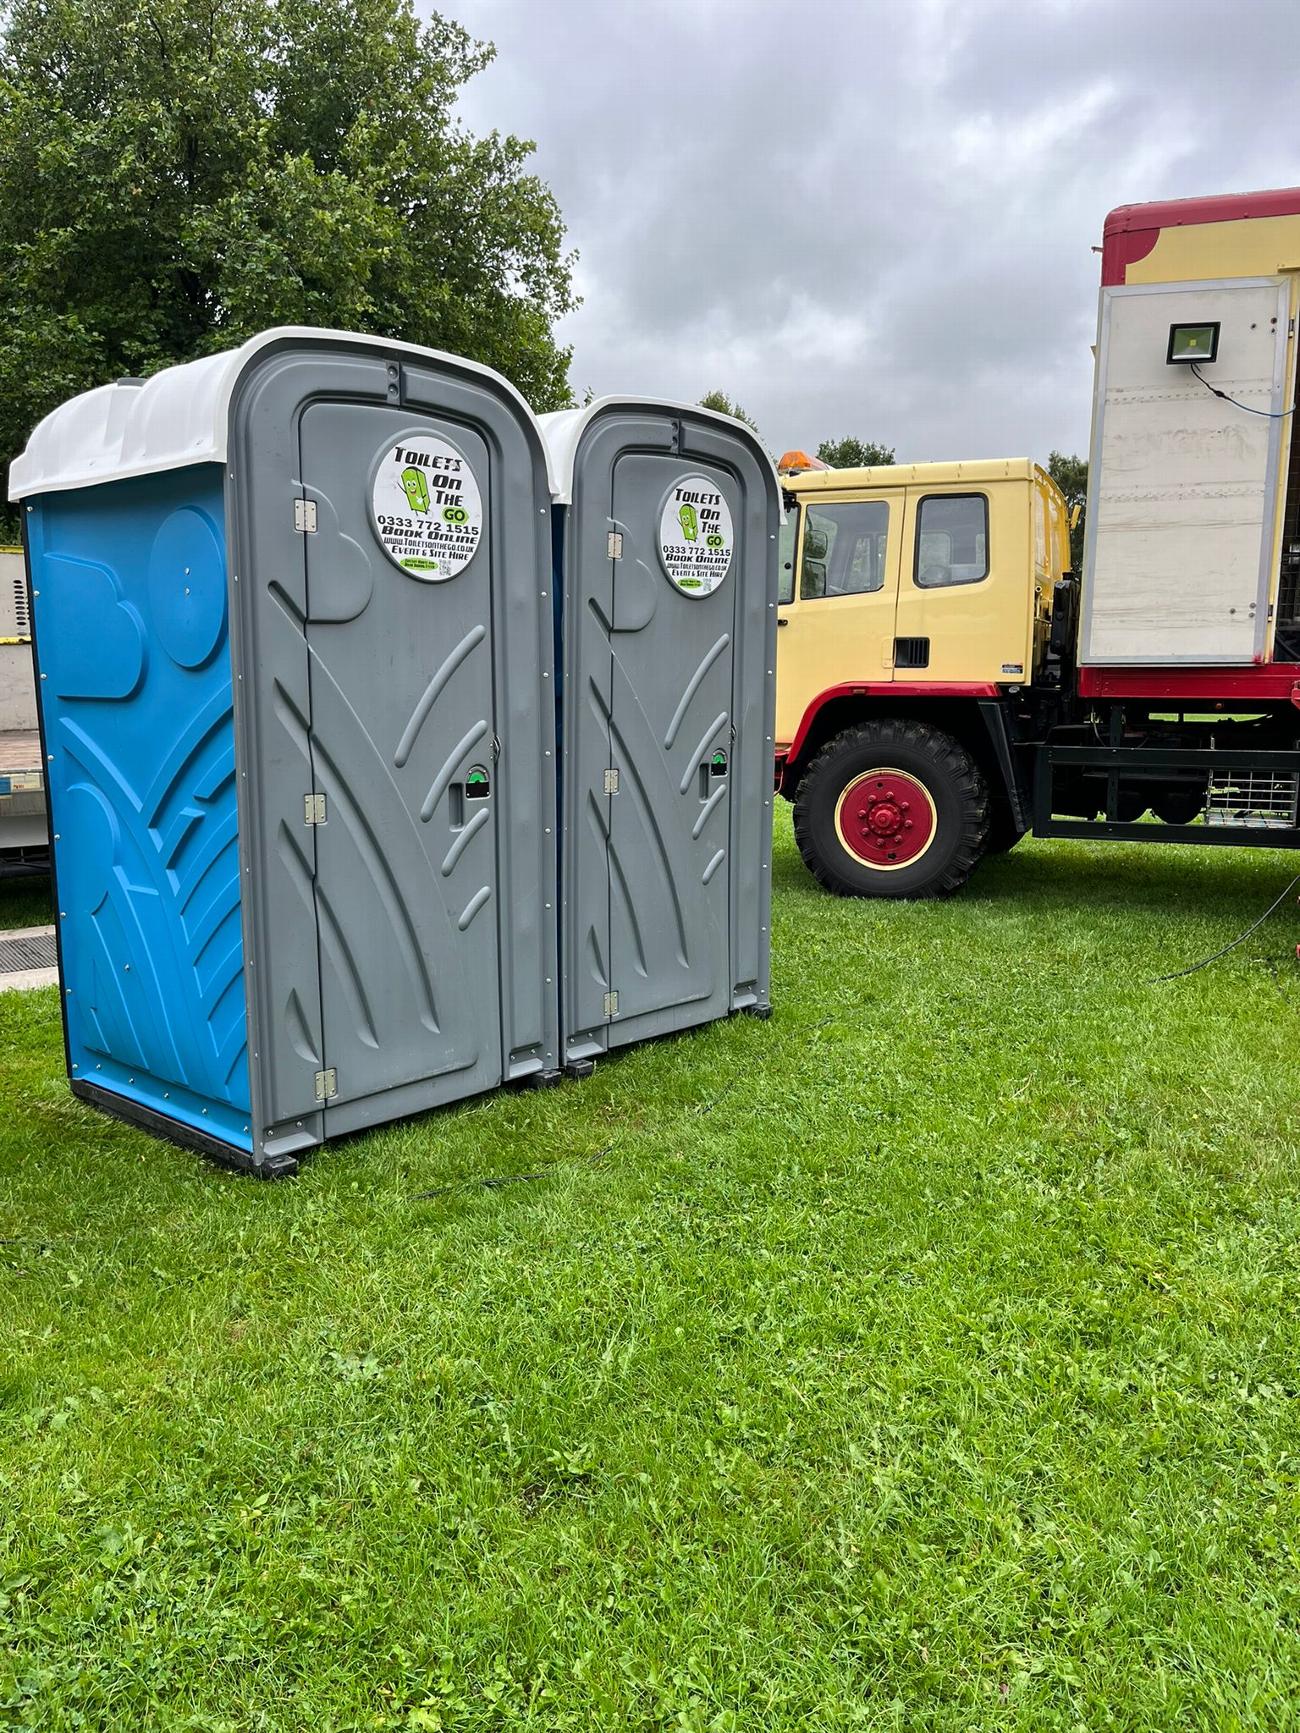 Gallery | Portable Toilet Loo Hire Rental Company in North West uk and Manchester gallery image 61